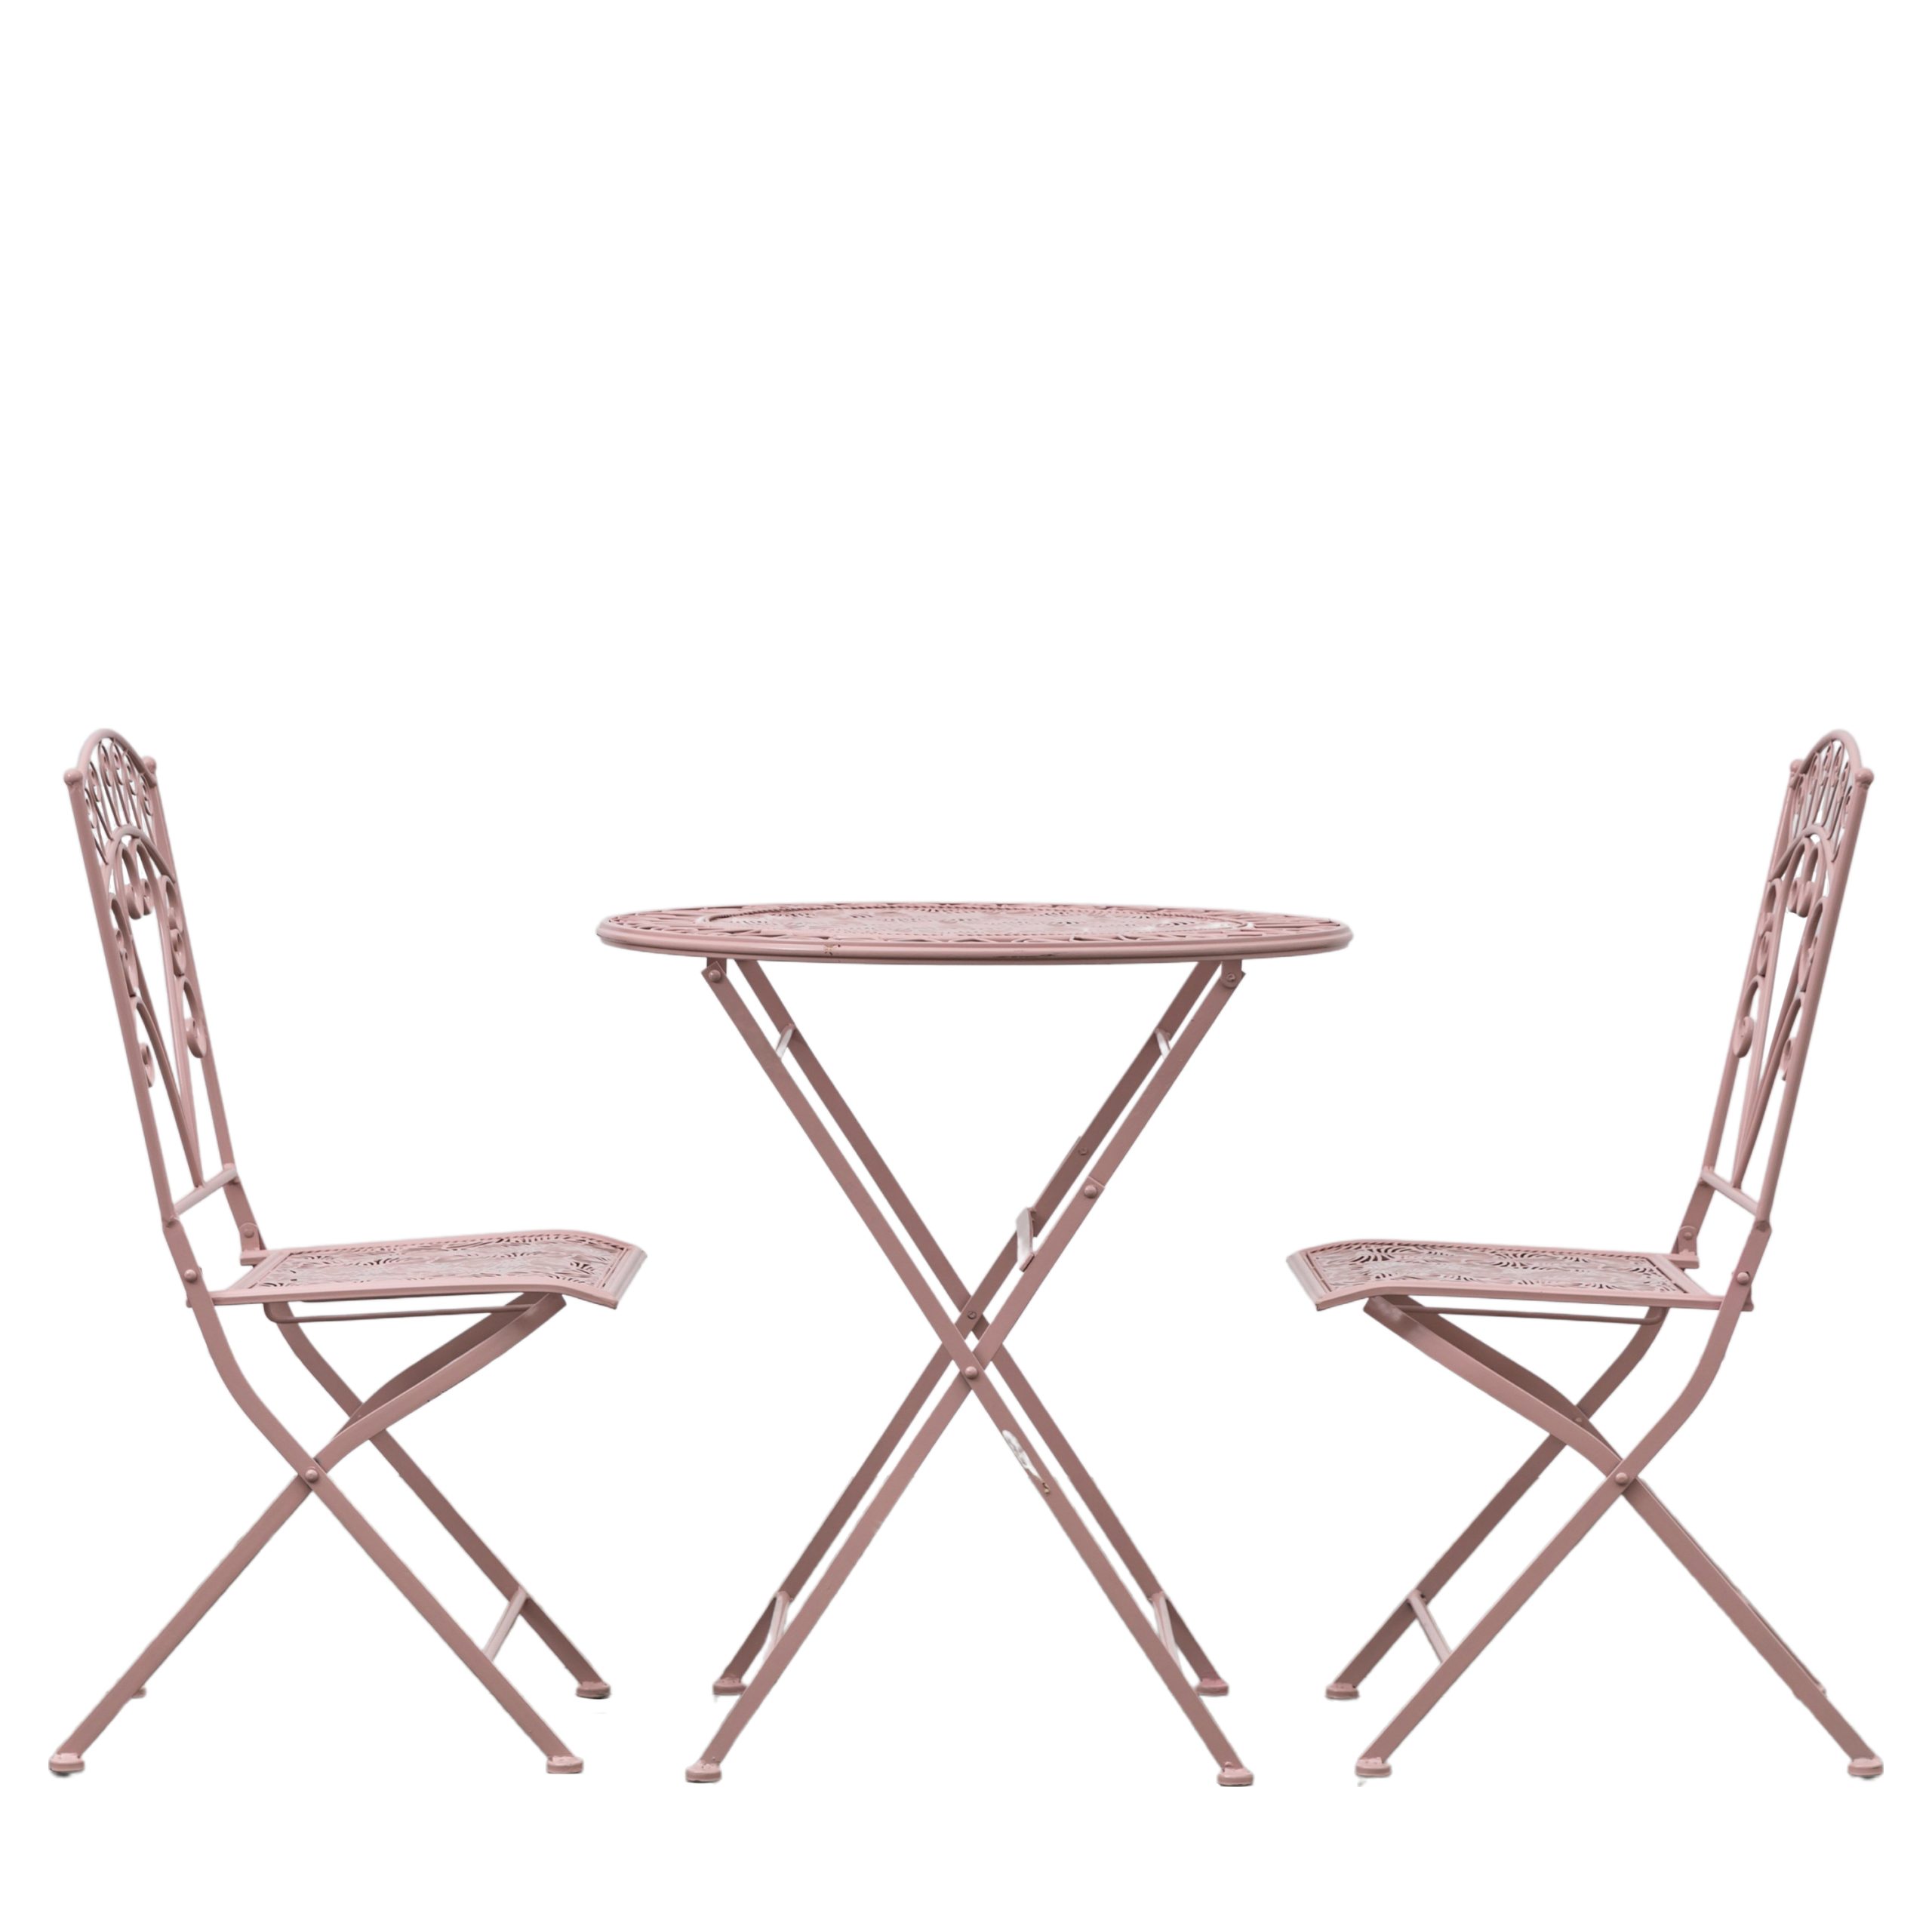 Gallery Outdoor Brindisi 2 Seater Bistro Set Coral